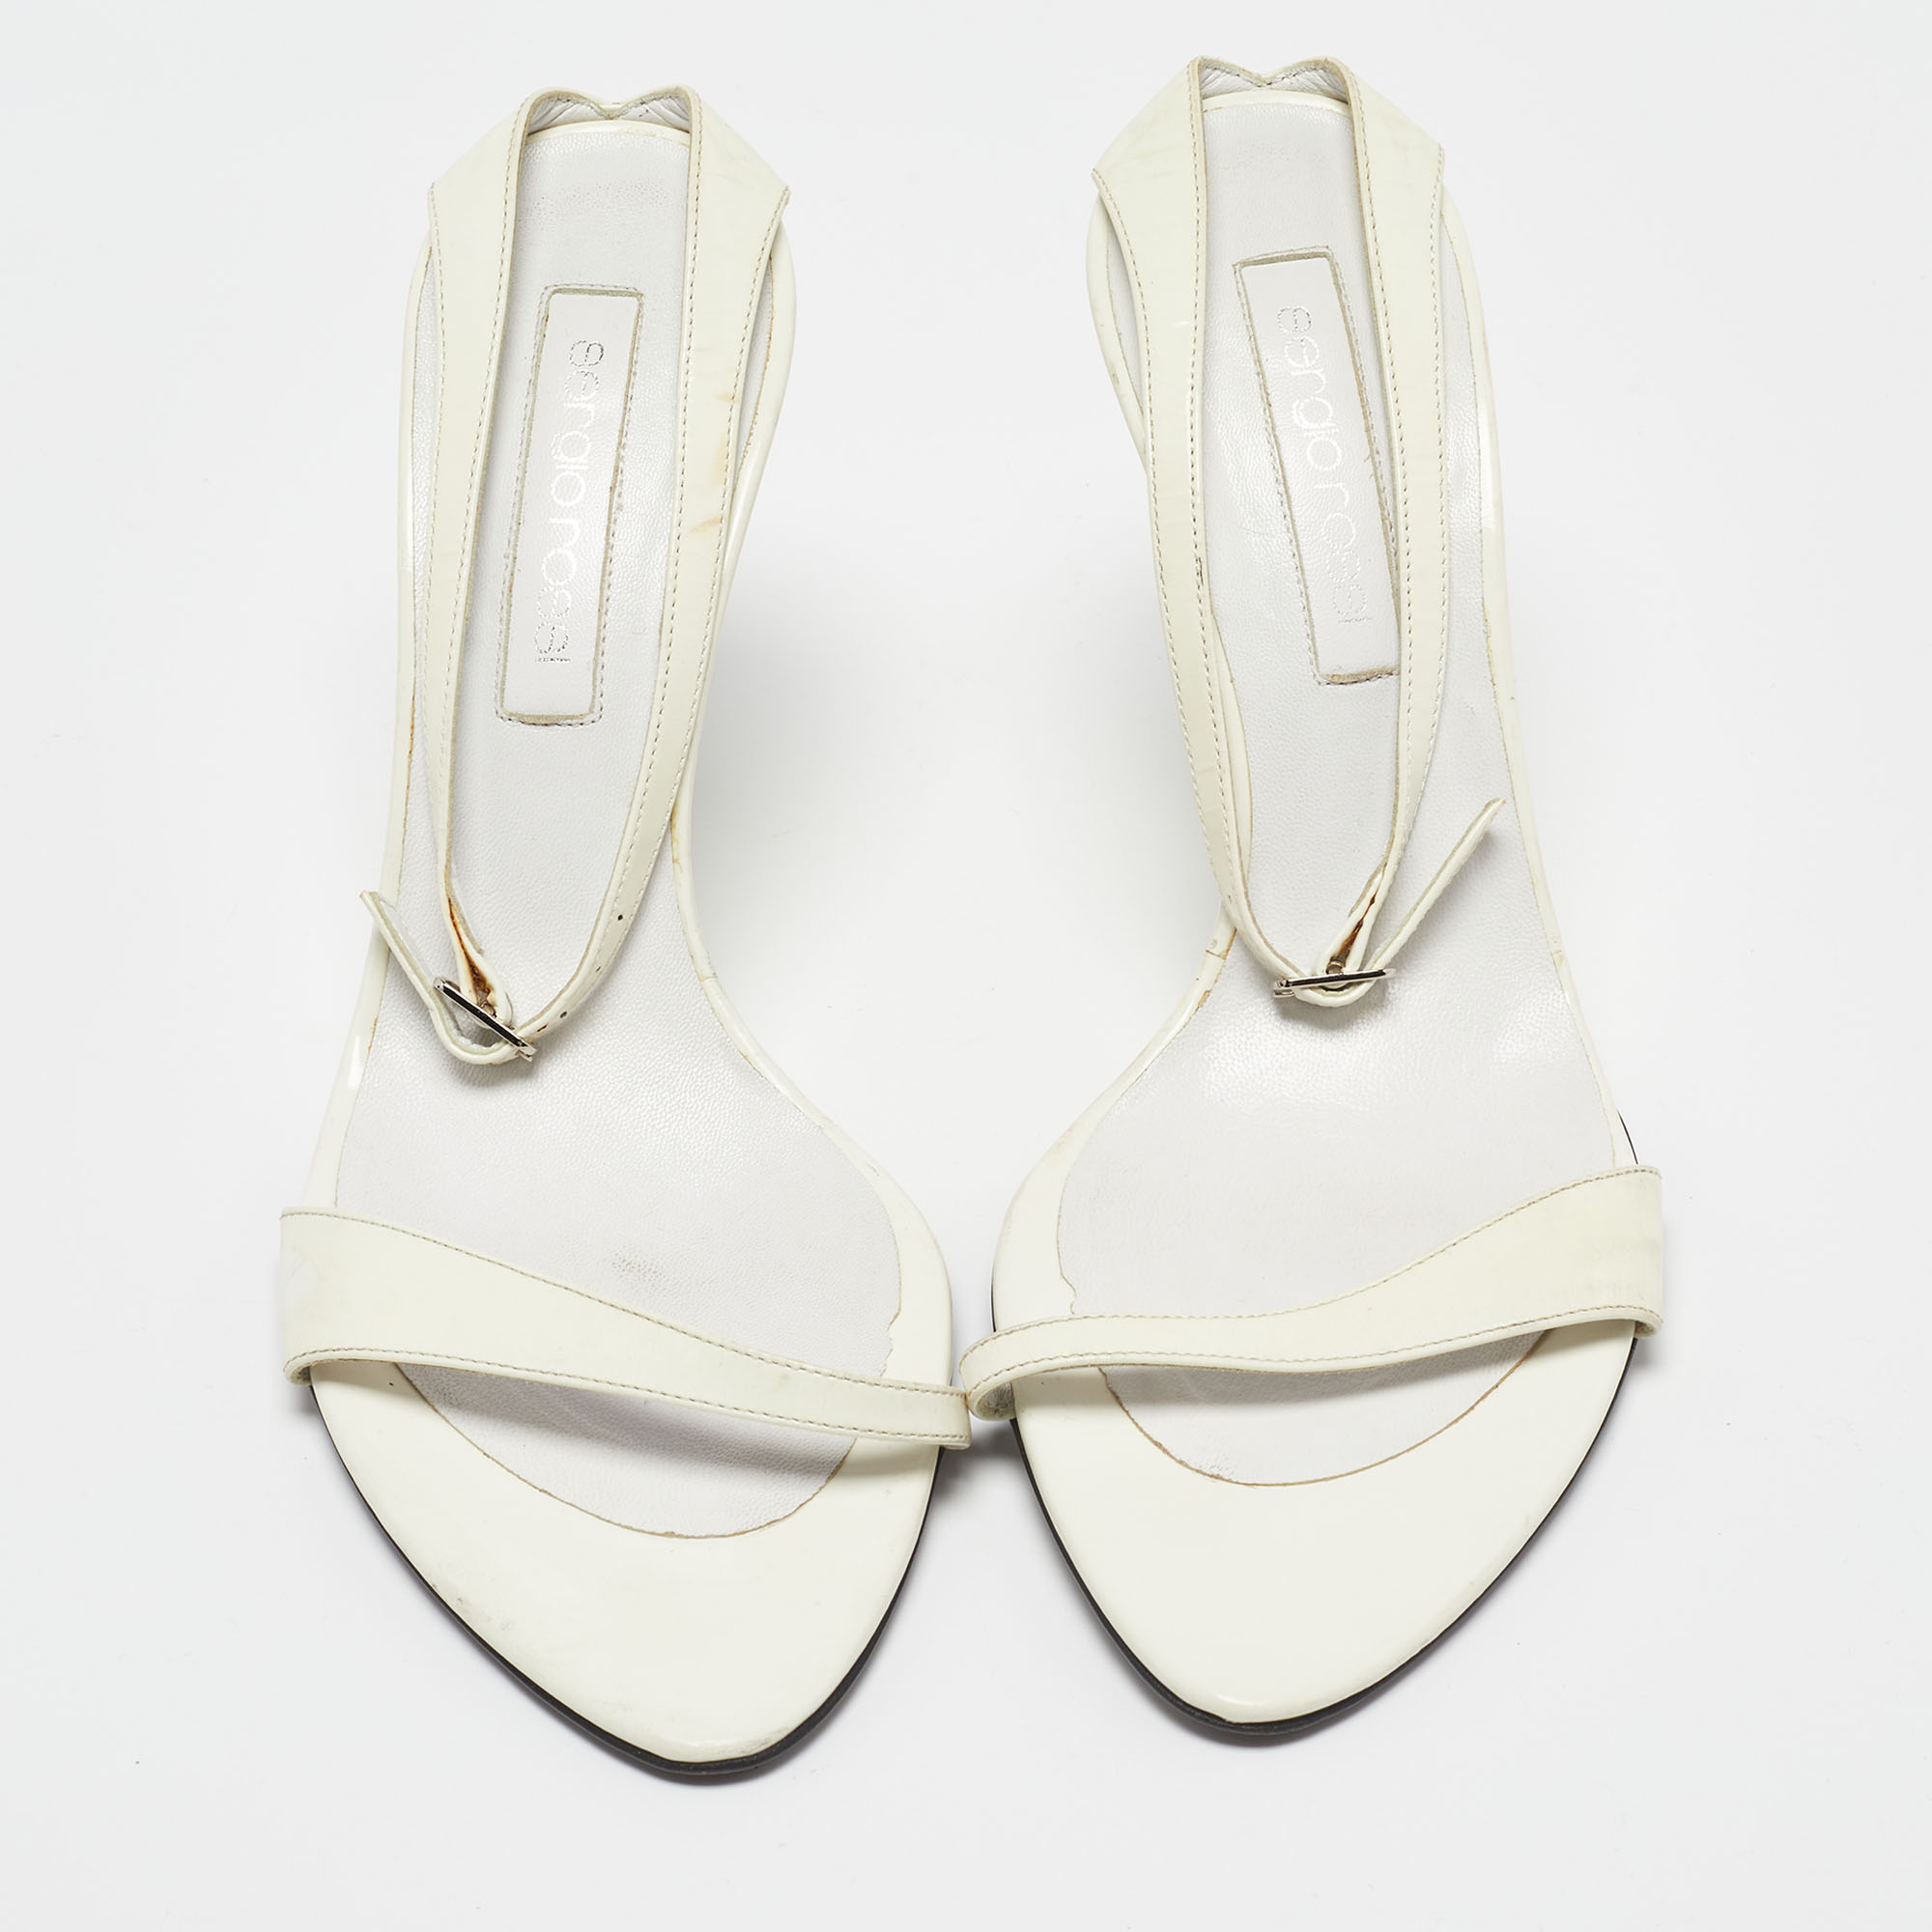 Sergio Rossi White Patent Leather Wedge Sandals Size 39.5